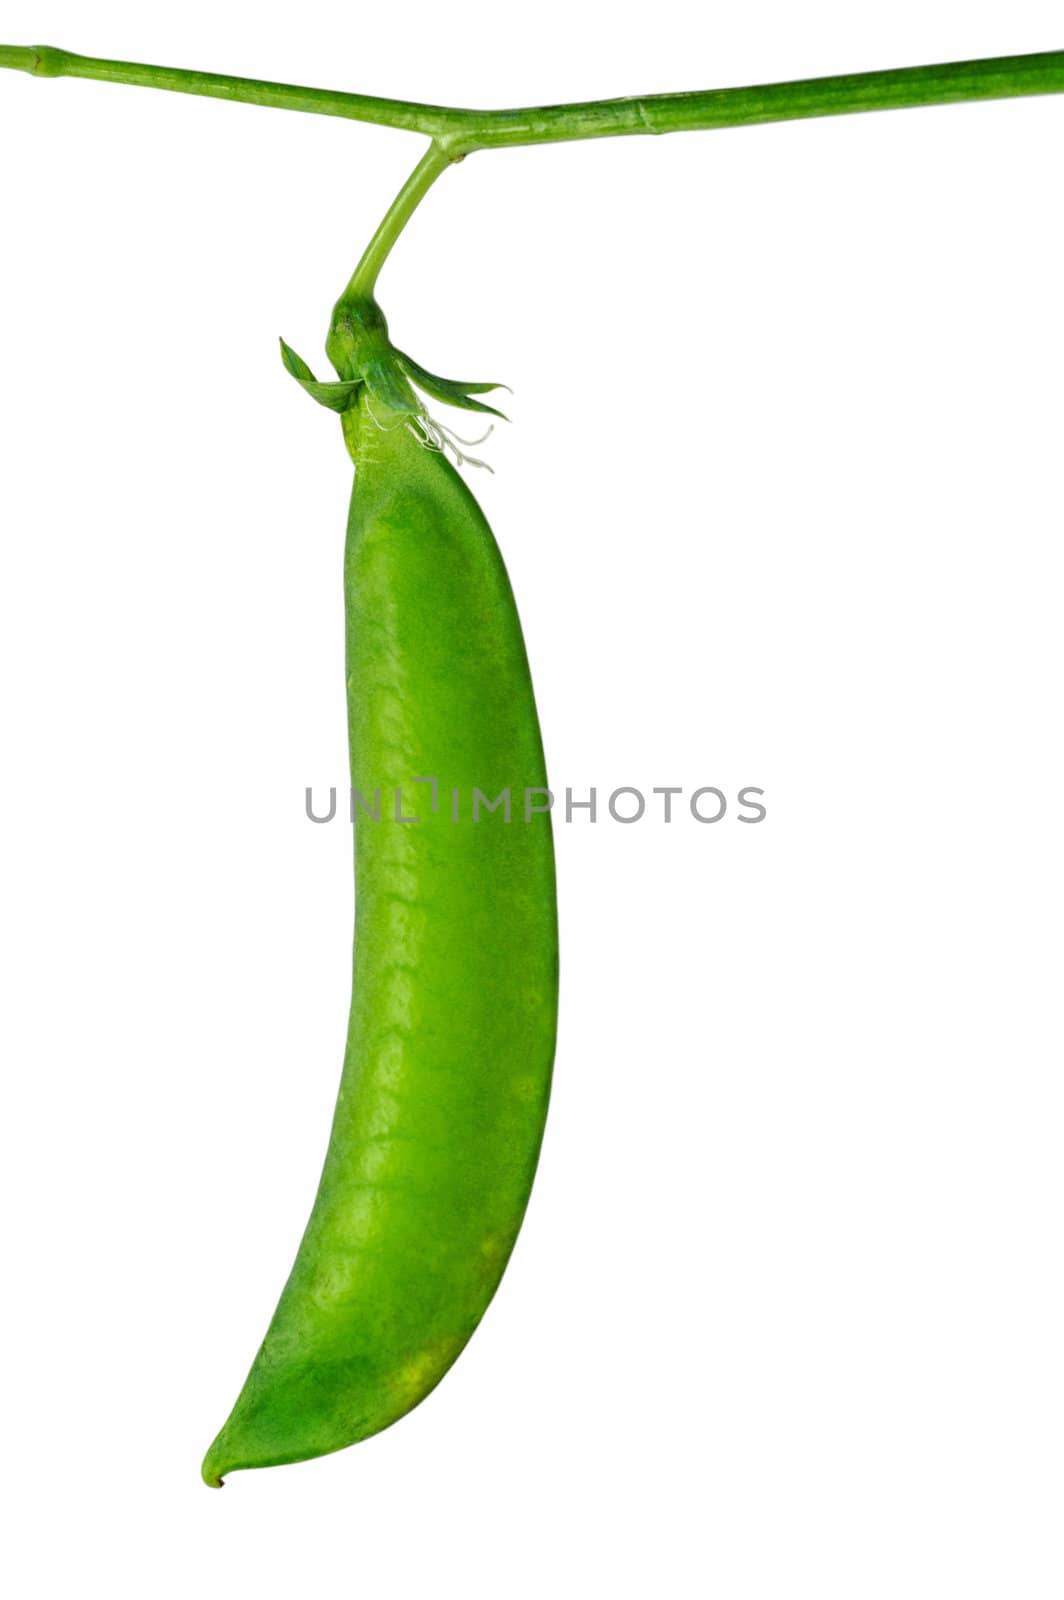 Pea pod with clipping path